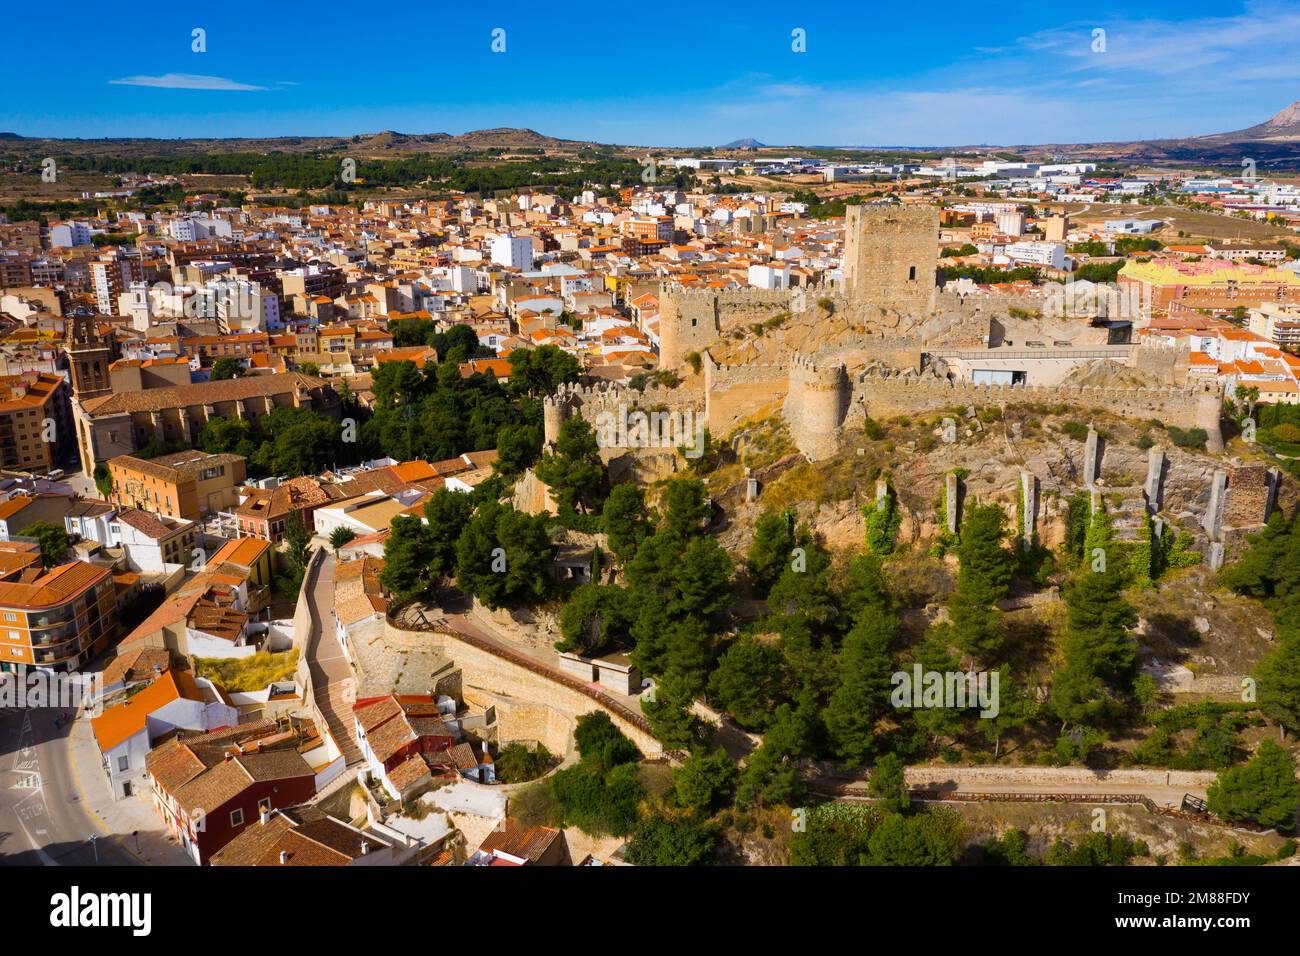 Aerial view of Spanish town of Almansa with Castle on hilltop Stock Photo